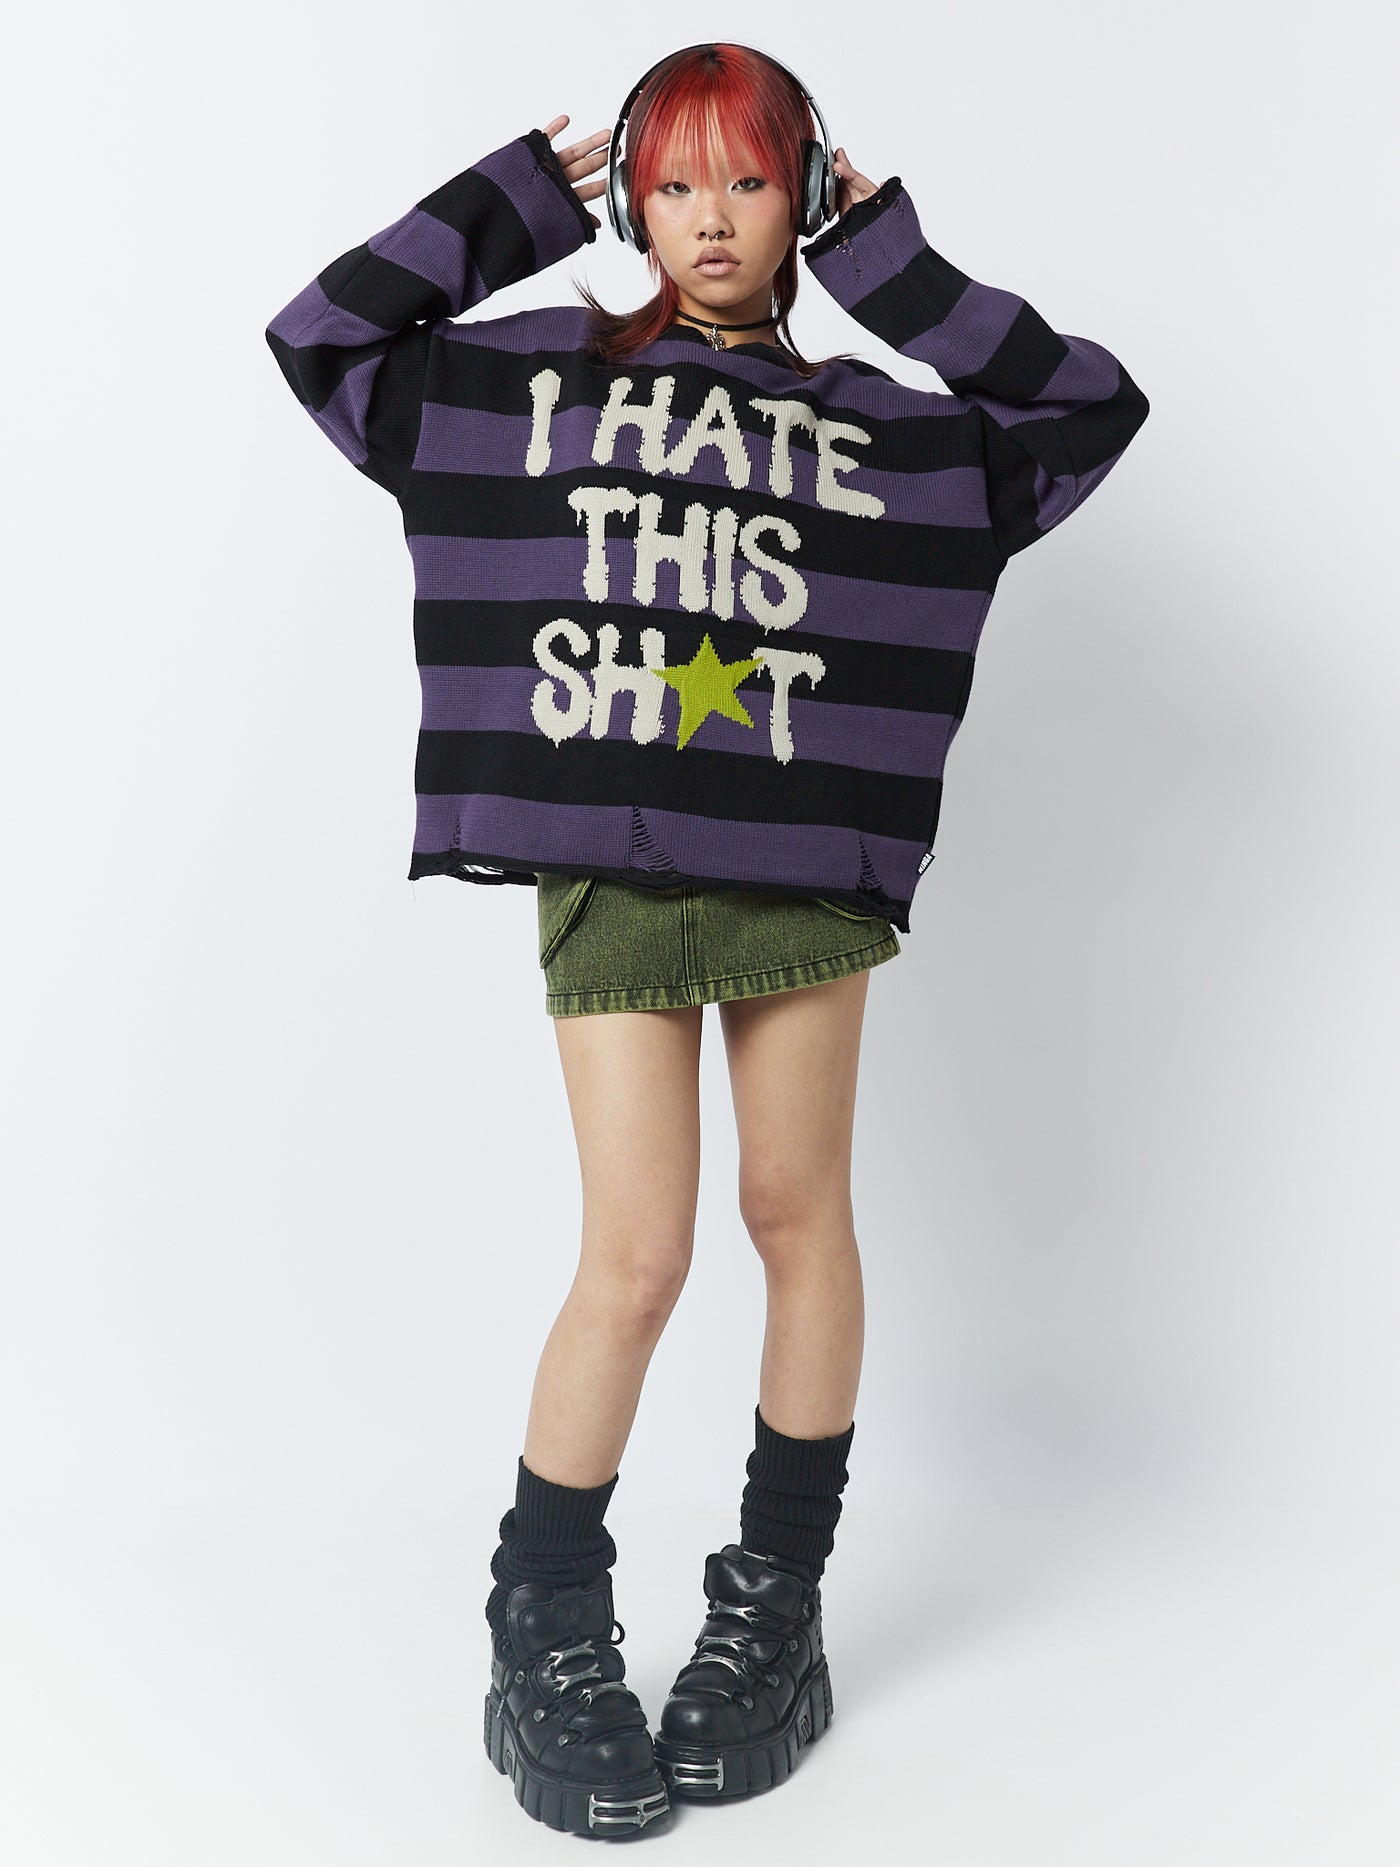 A striped jumper with the graphic "I Hate This Sh*t" by Minga London. This jumper combines a bold and rebellious design with trendy stripes, making a statement and adding a touch of attitude to your outfit.